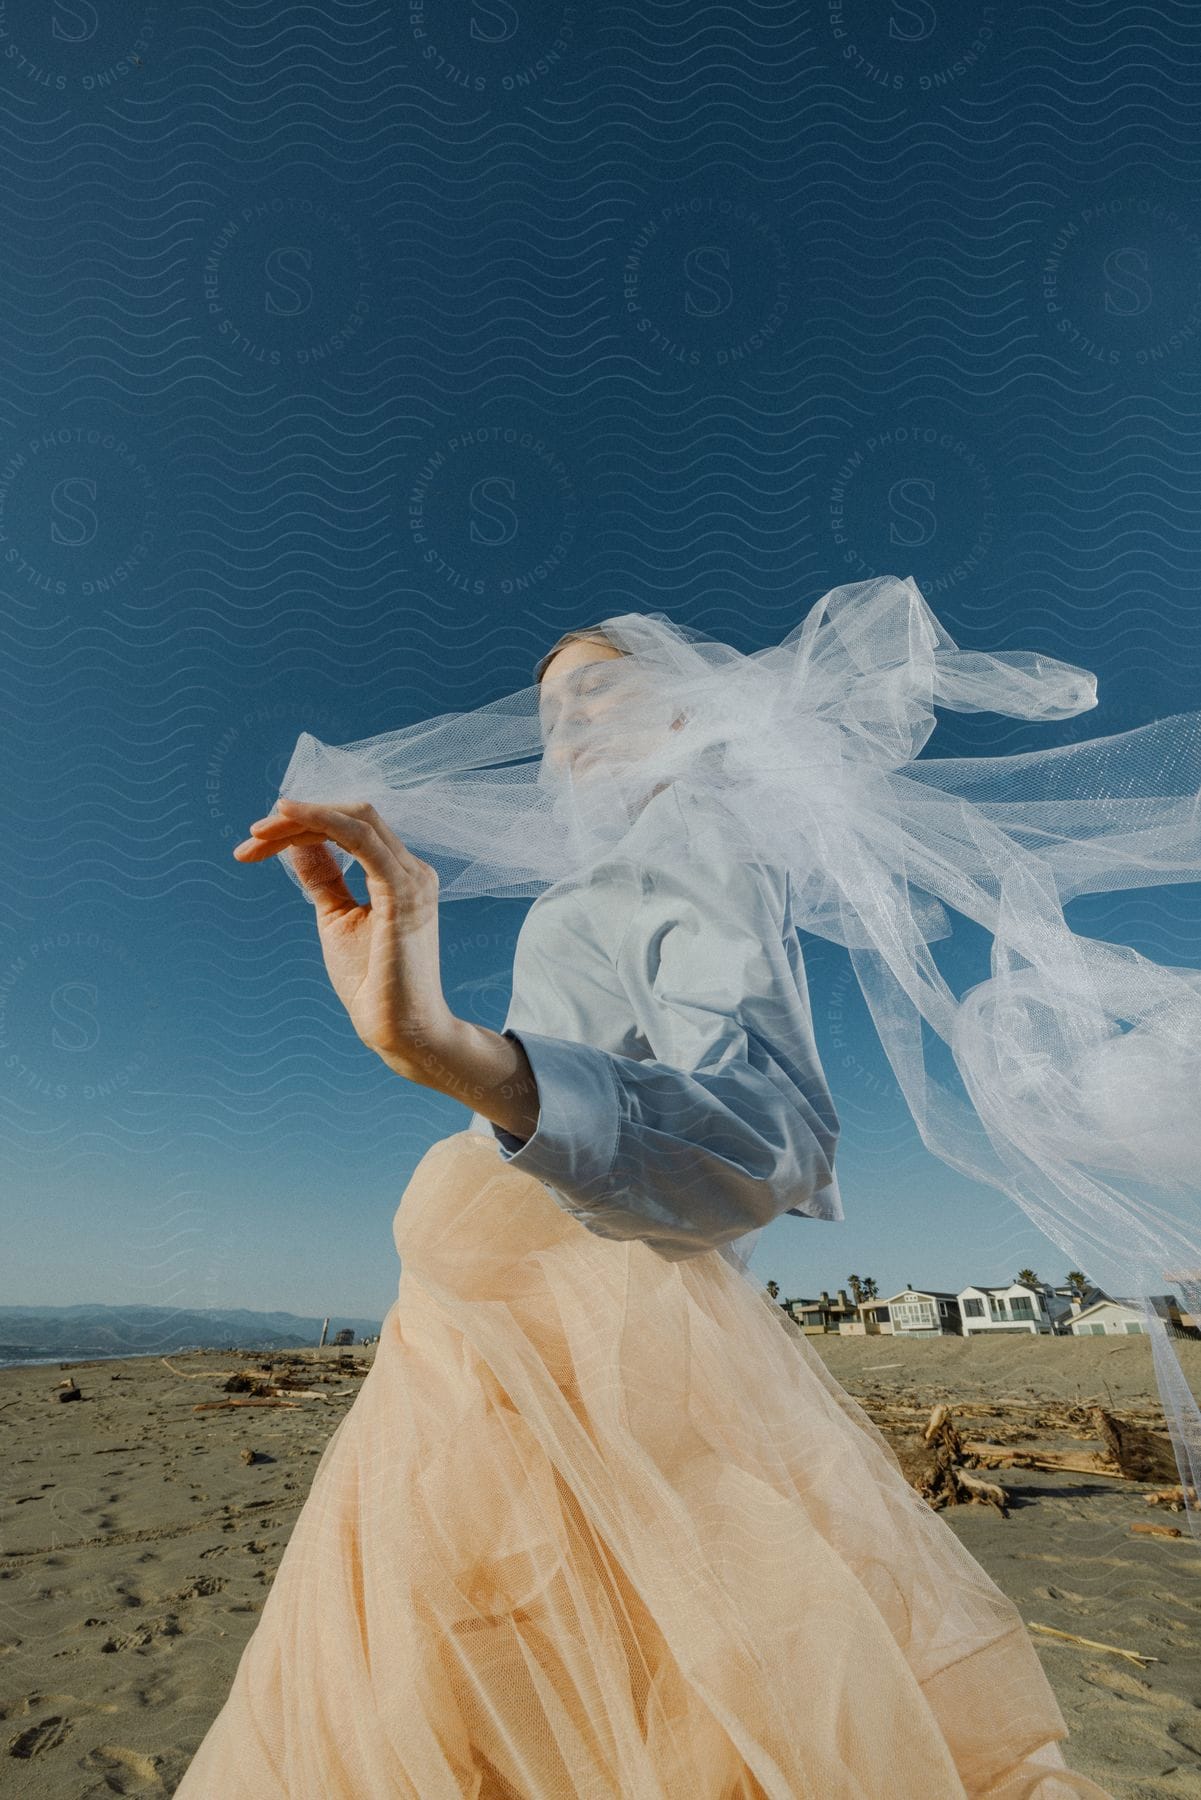 Stock photo of a woman wearing a light blue shirt and pink skirt waves a white veil on the beach near the ocean